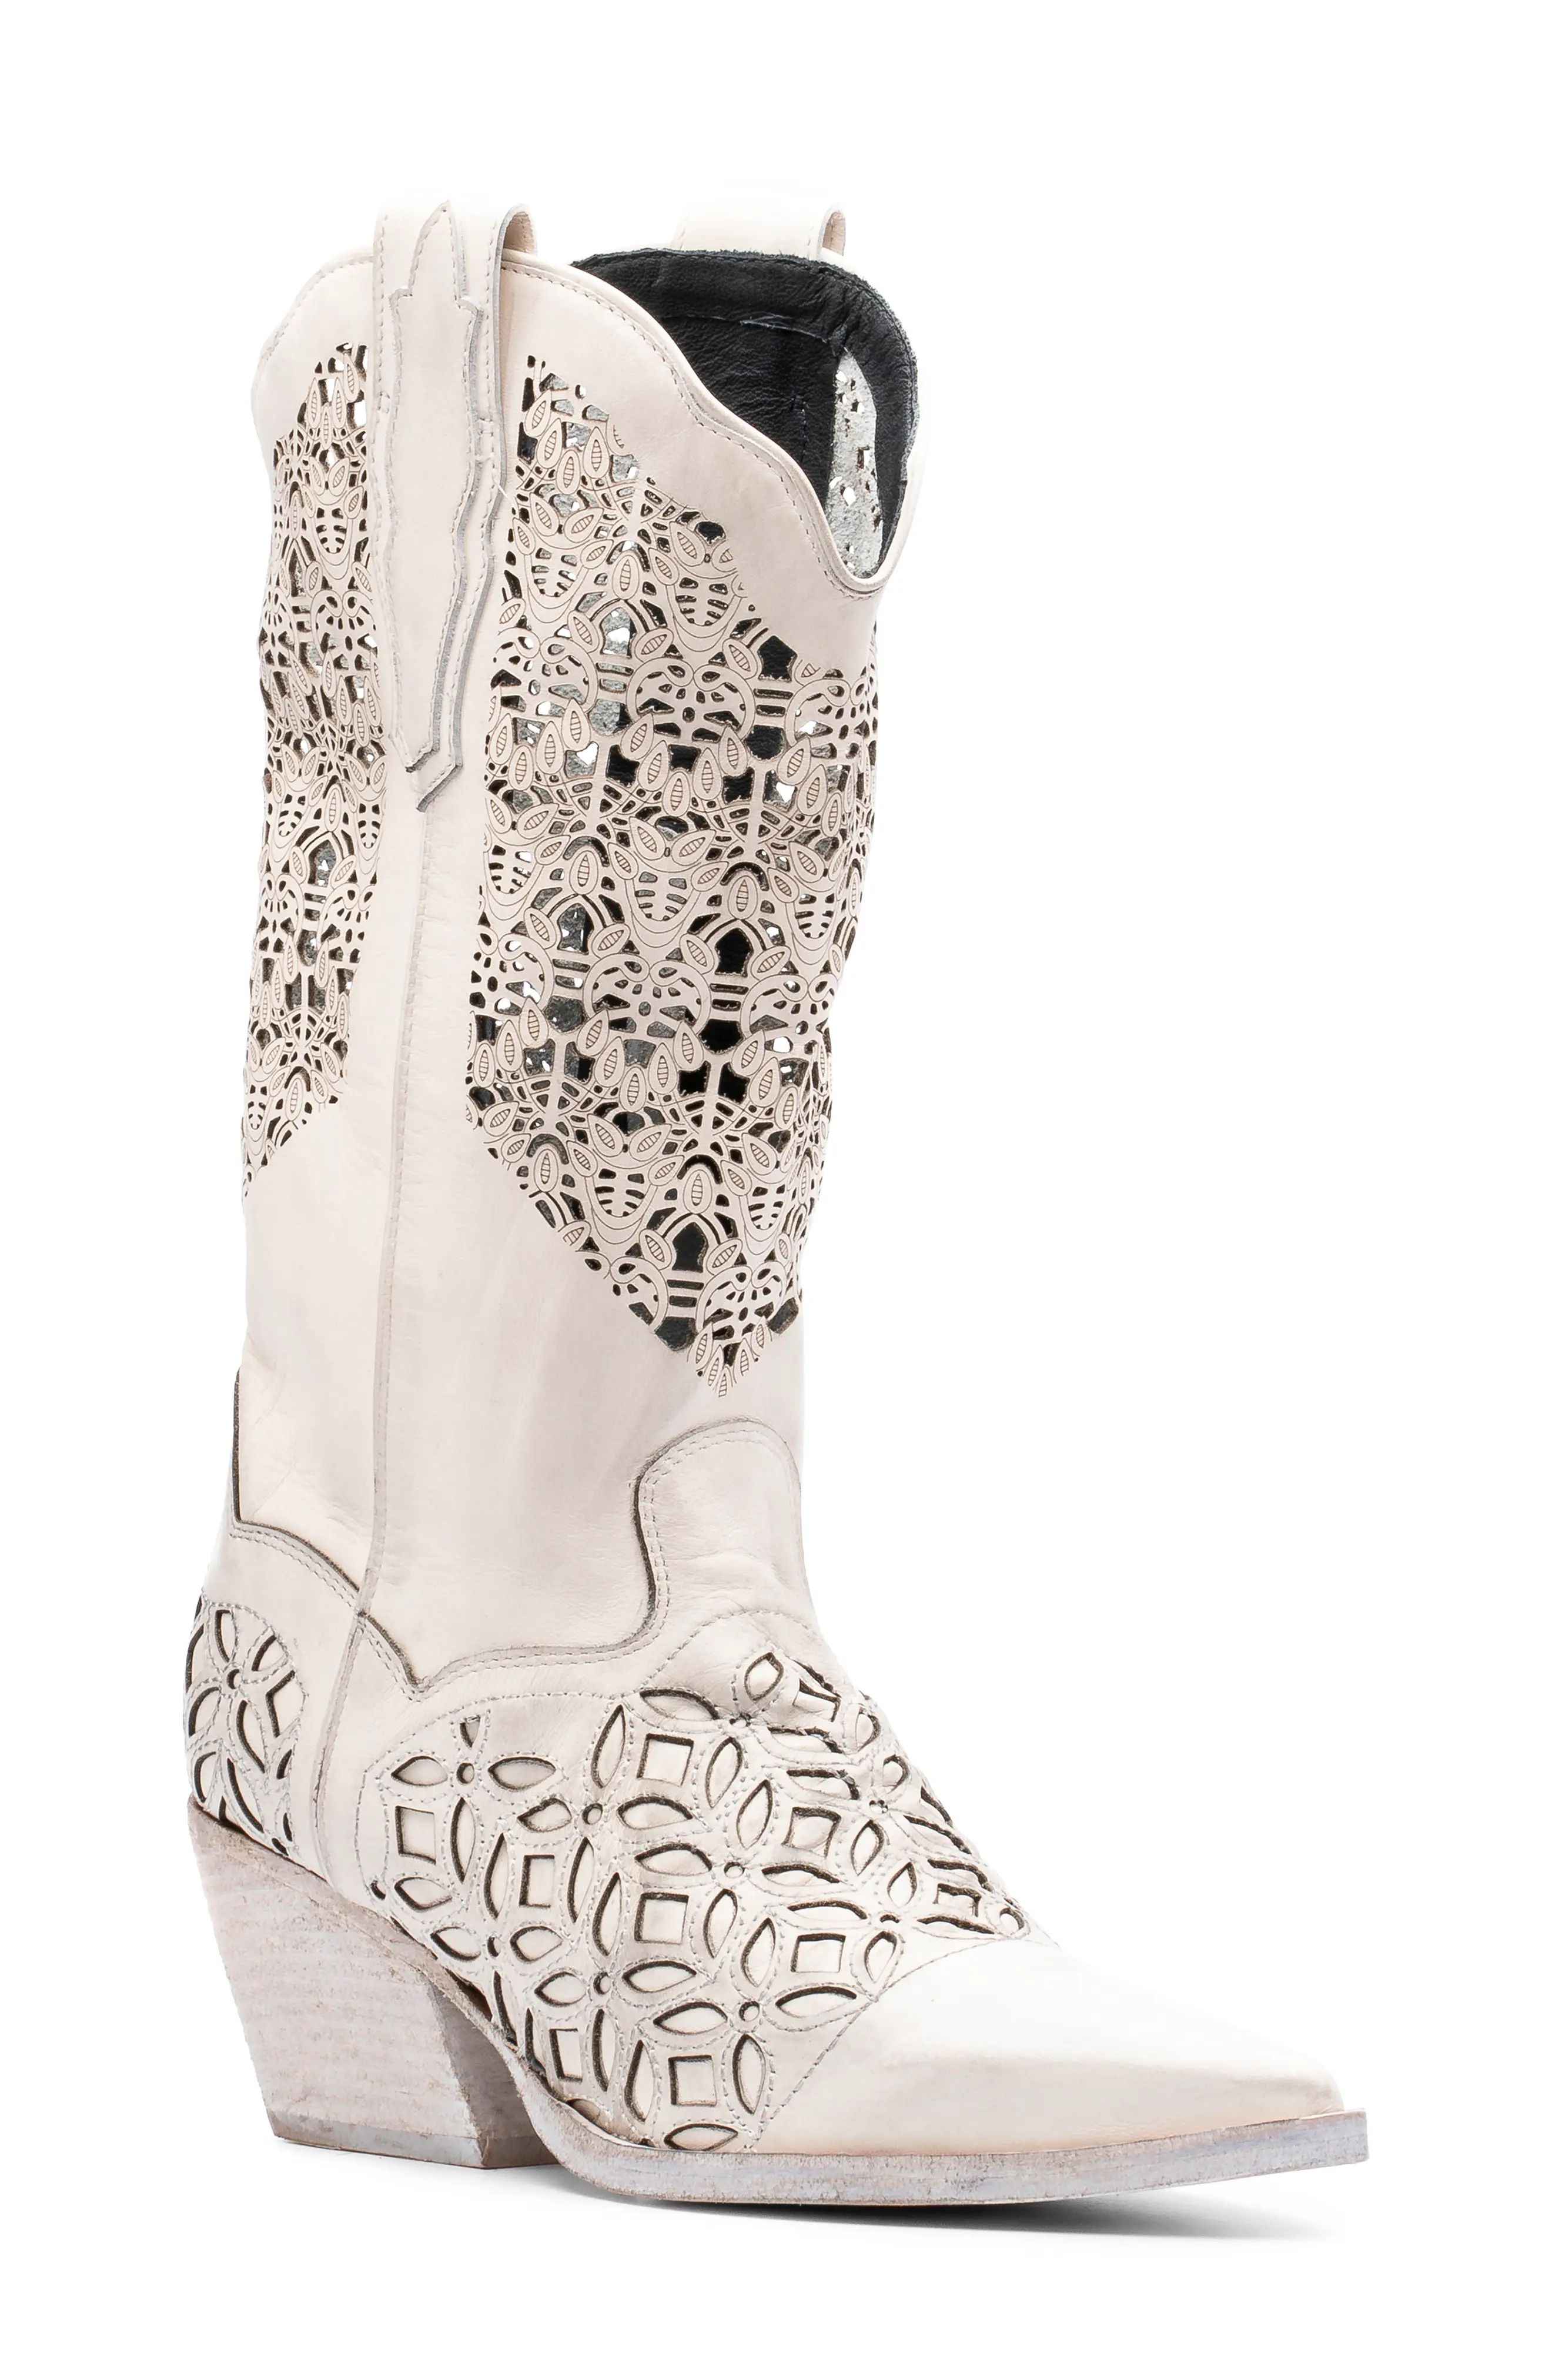 Golo Shyanne Cowboy Boot in Soy Calf at Nordstrom, Size 7 | Nordstrom